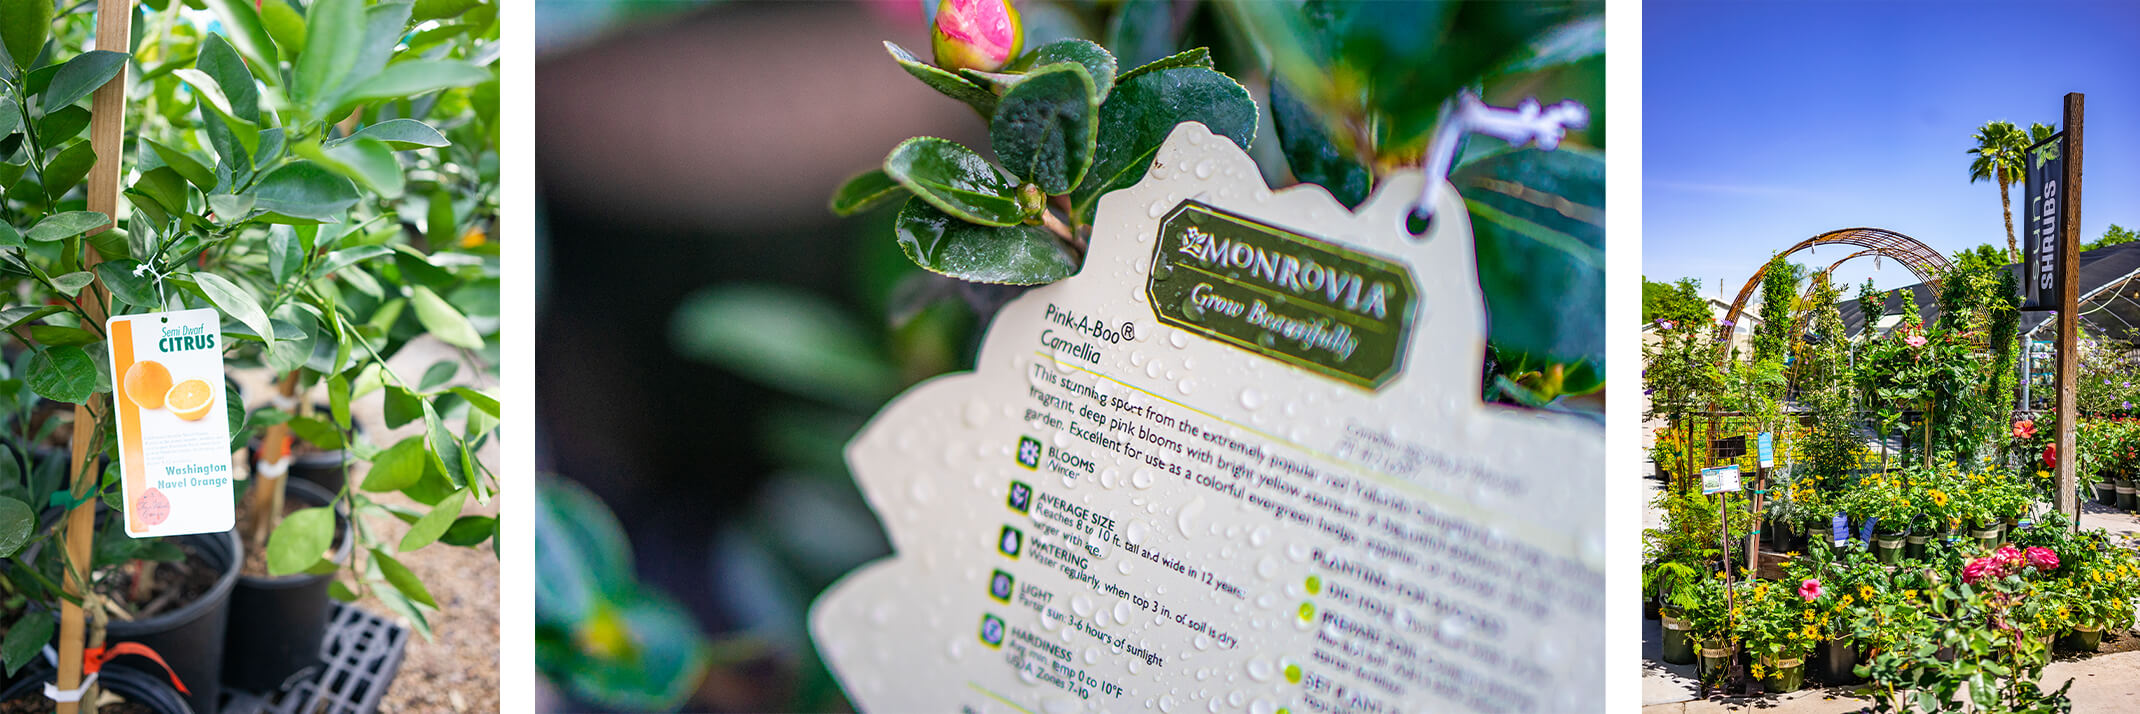 A citrus plant and tag, a Monrovia camellia tag, and the Sun Shrubs section at SummerWinds Nursery.